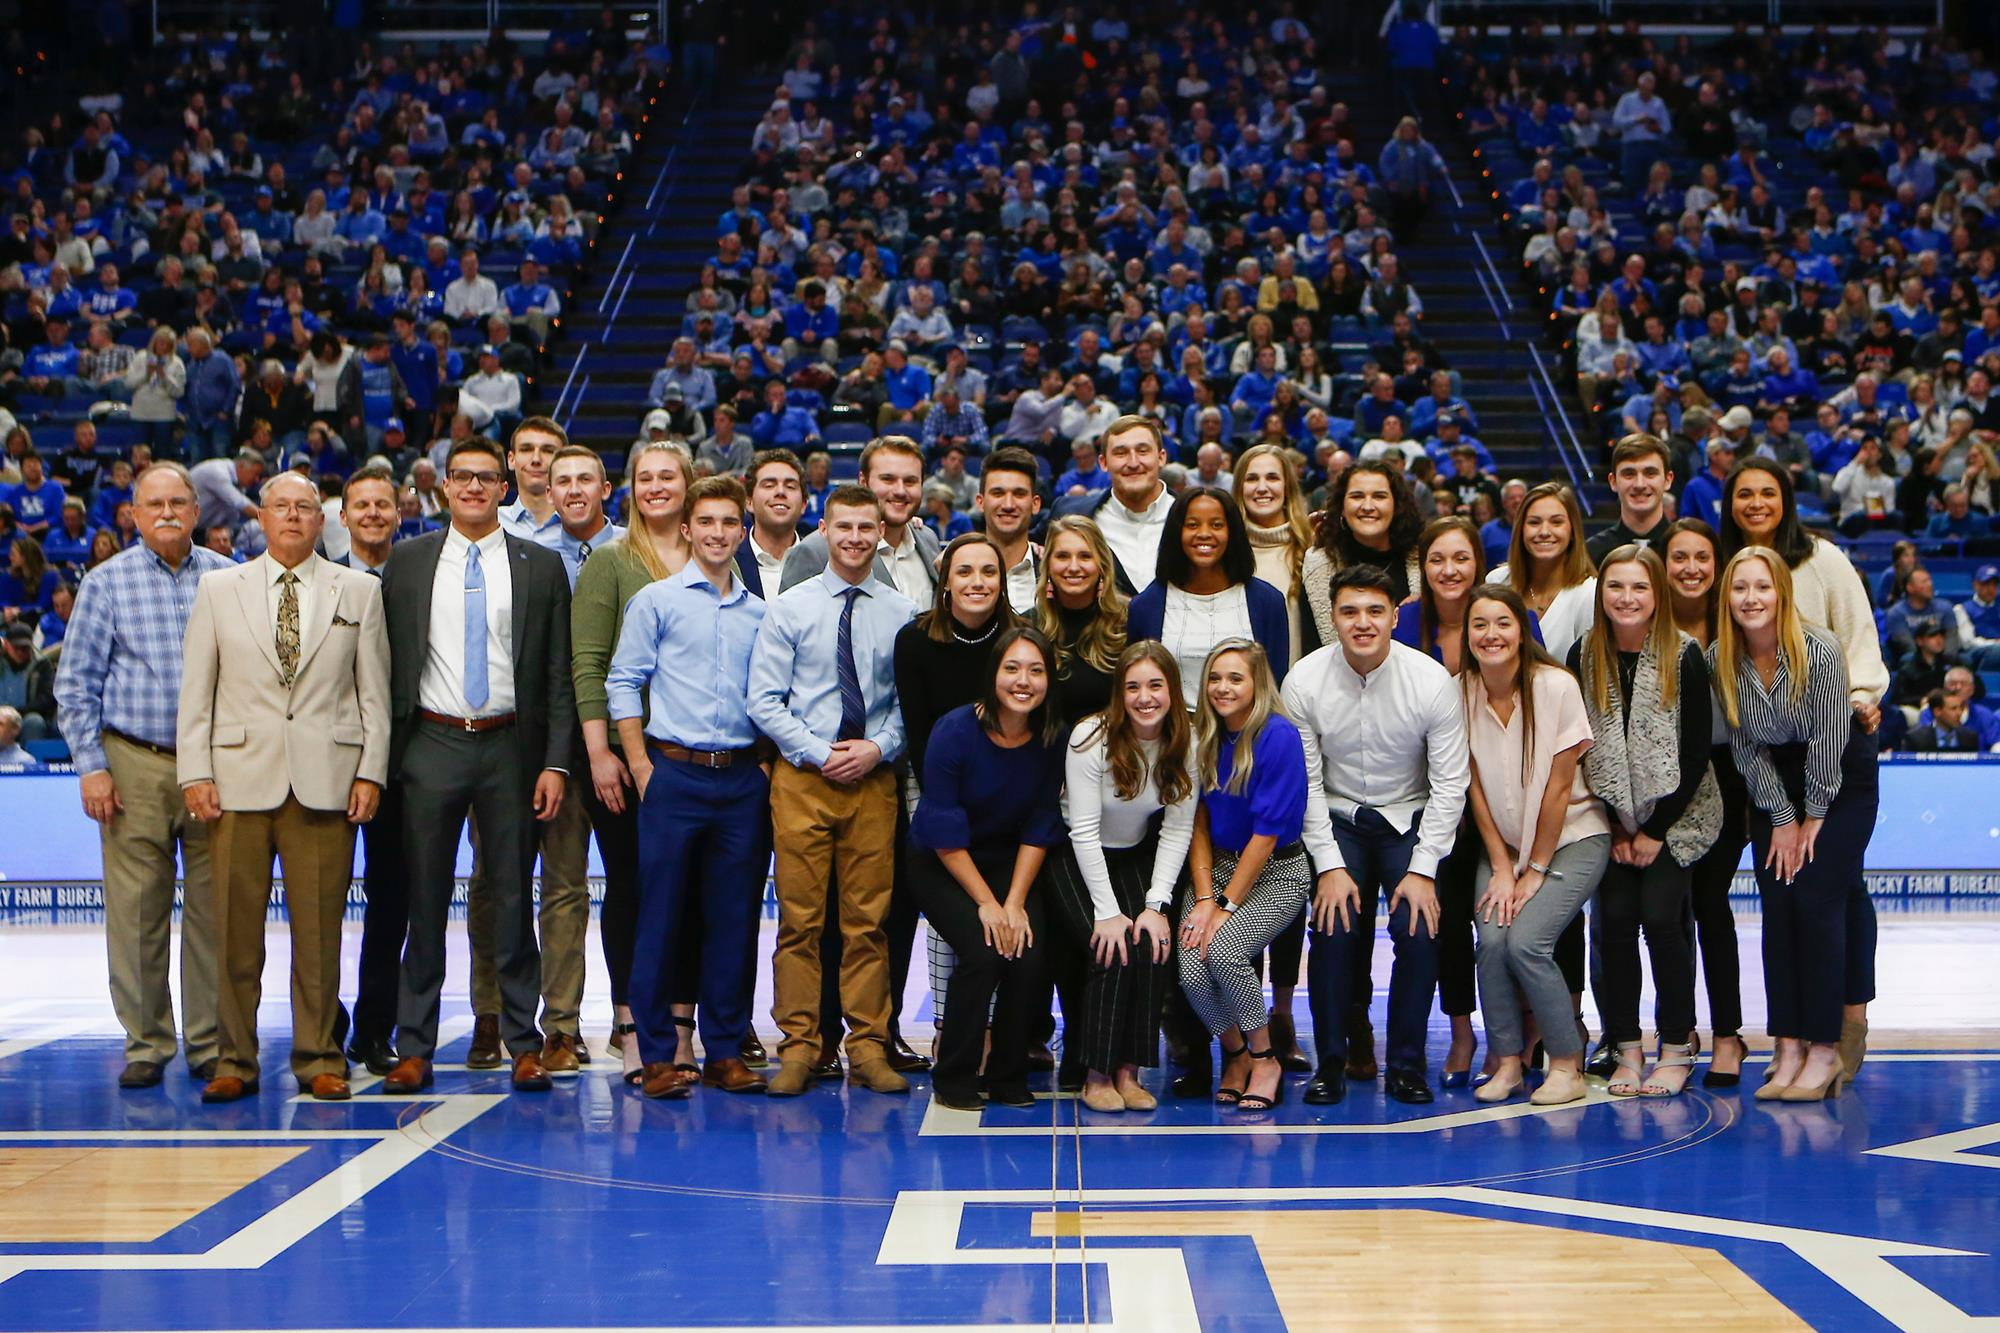 29 Wildcats Inducted into Frank G. Ham Society of Character